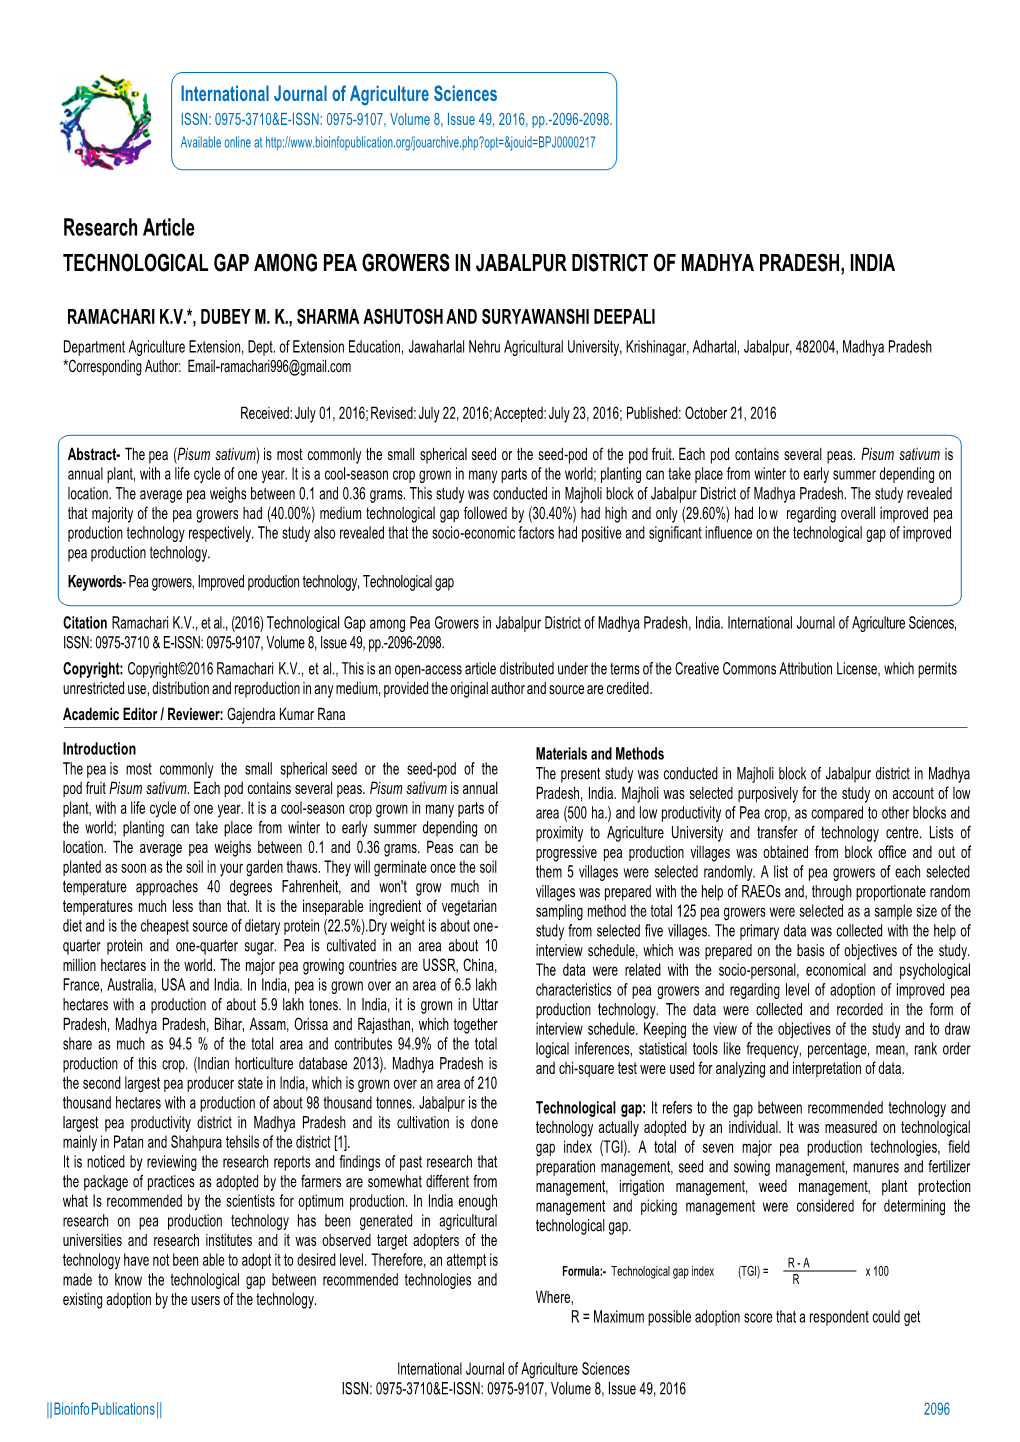 Research Article TECHNOLOGICAL GAP AMONG PEA GROWERS in JABALPUR DISTRICT of MADHYA PRADESH, INDIA